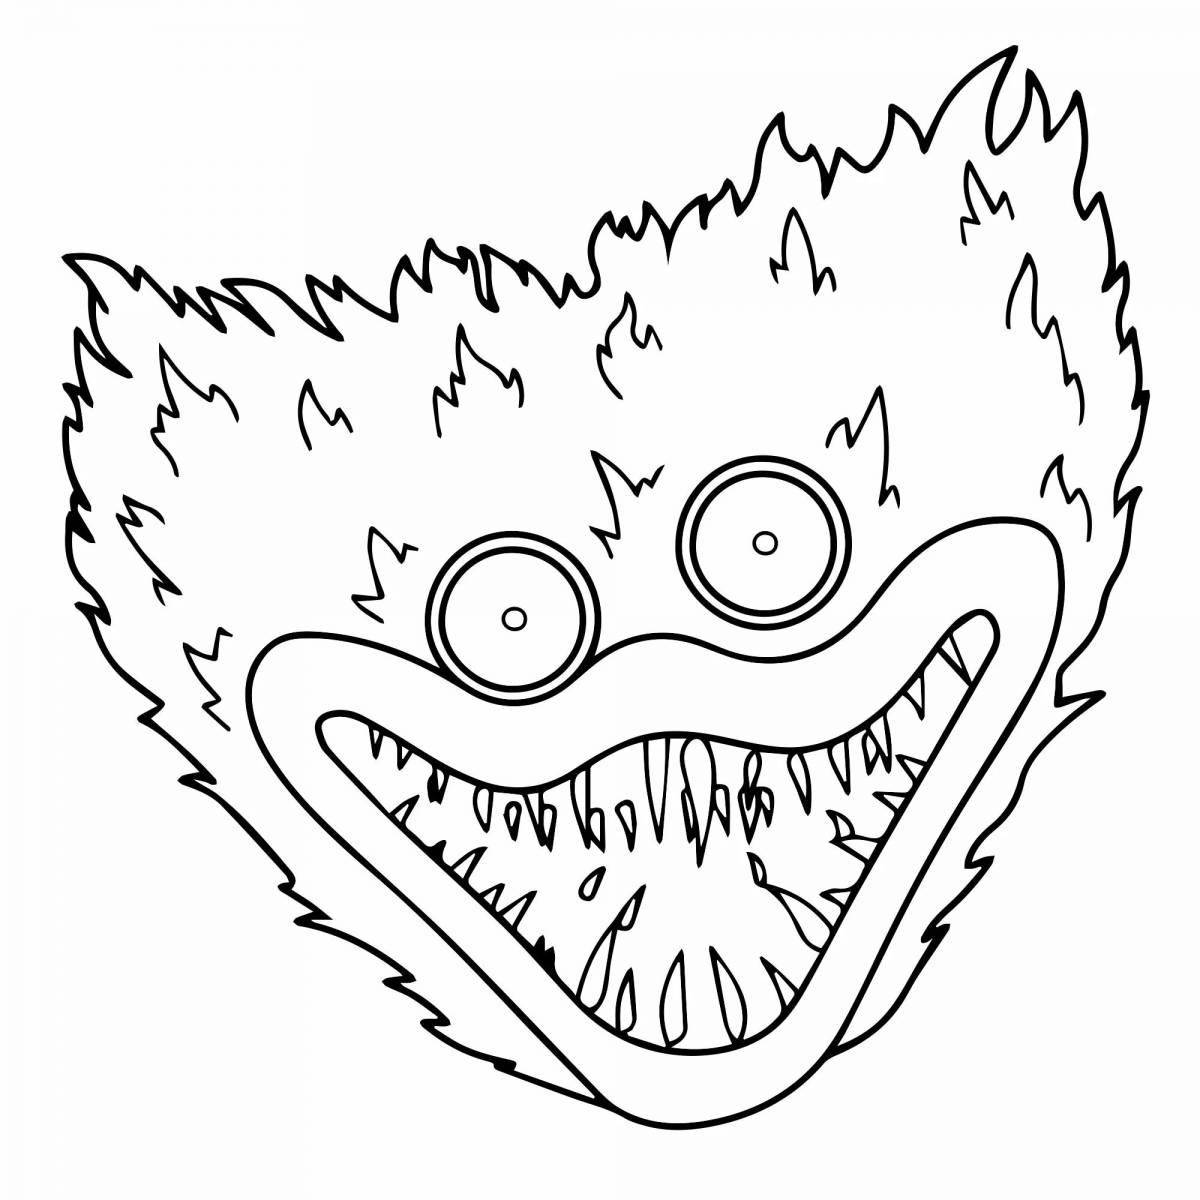 Funny hadivagi coloring pages